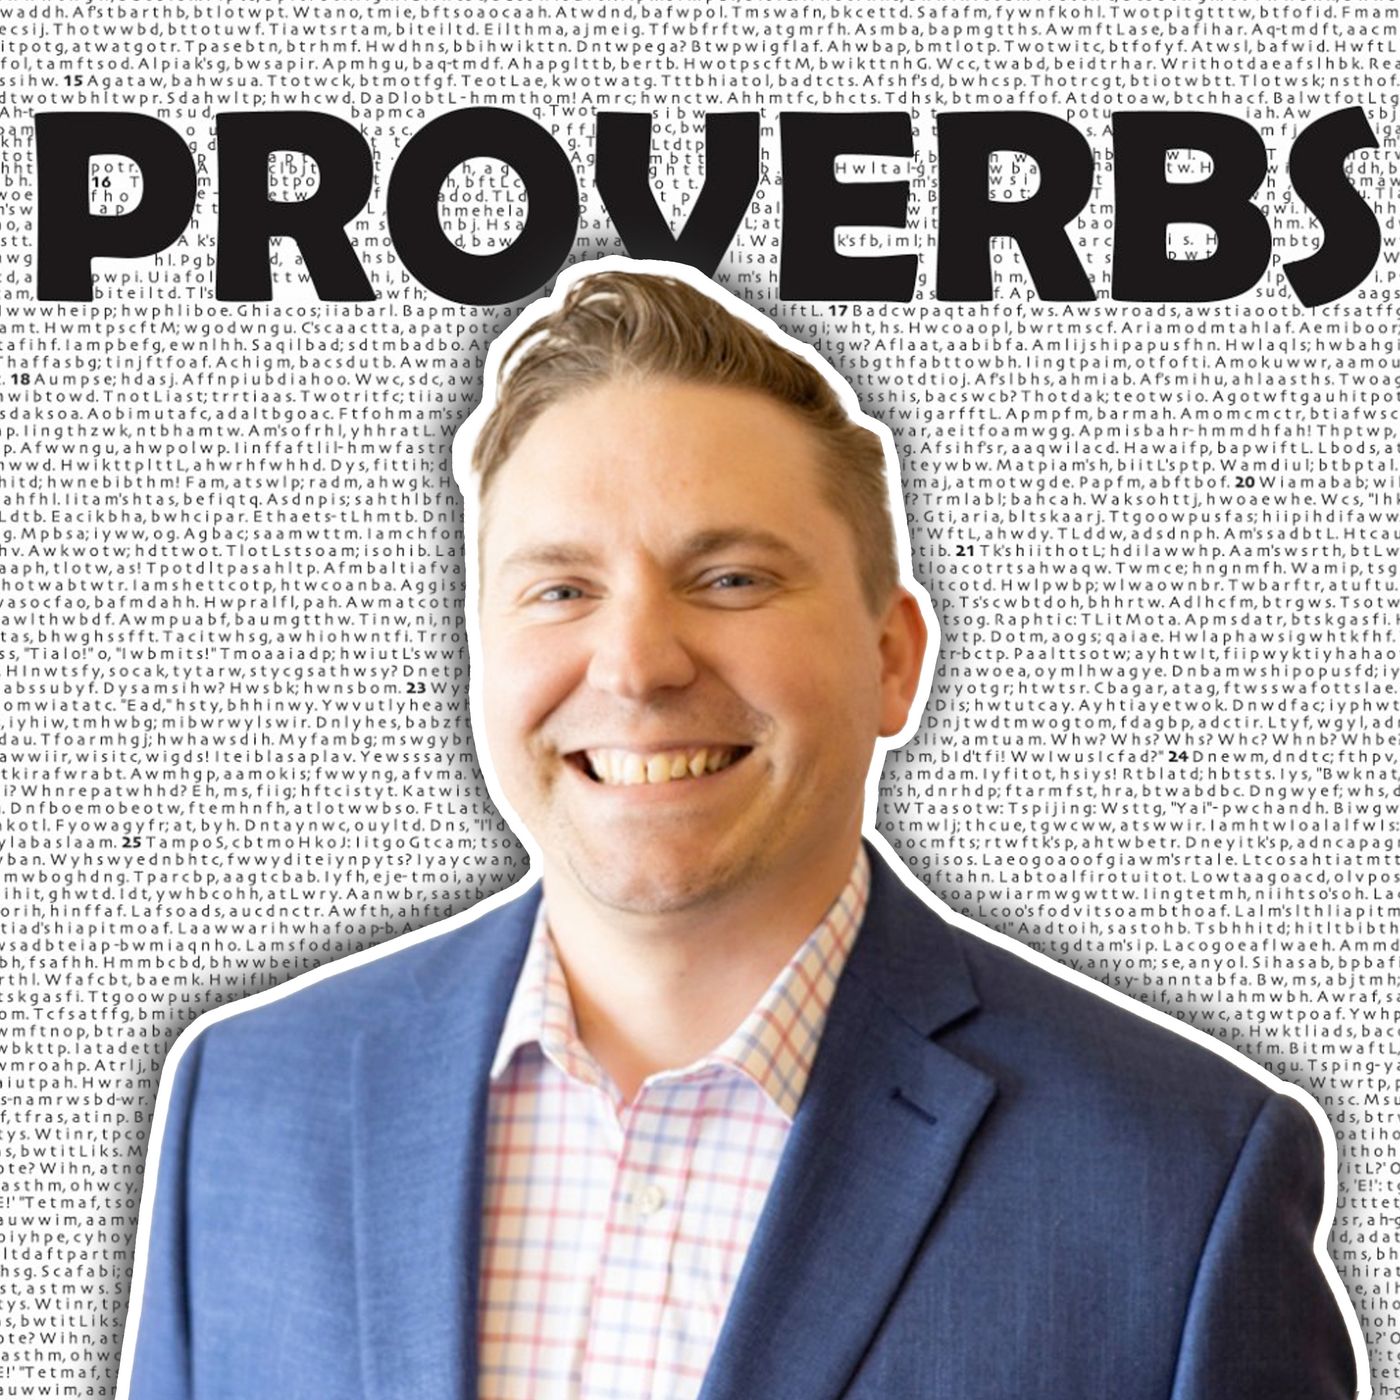 He Memorized Proverbs Word-for-Word...here's how he did it